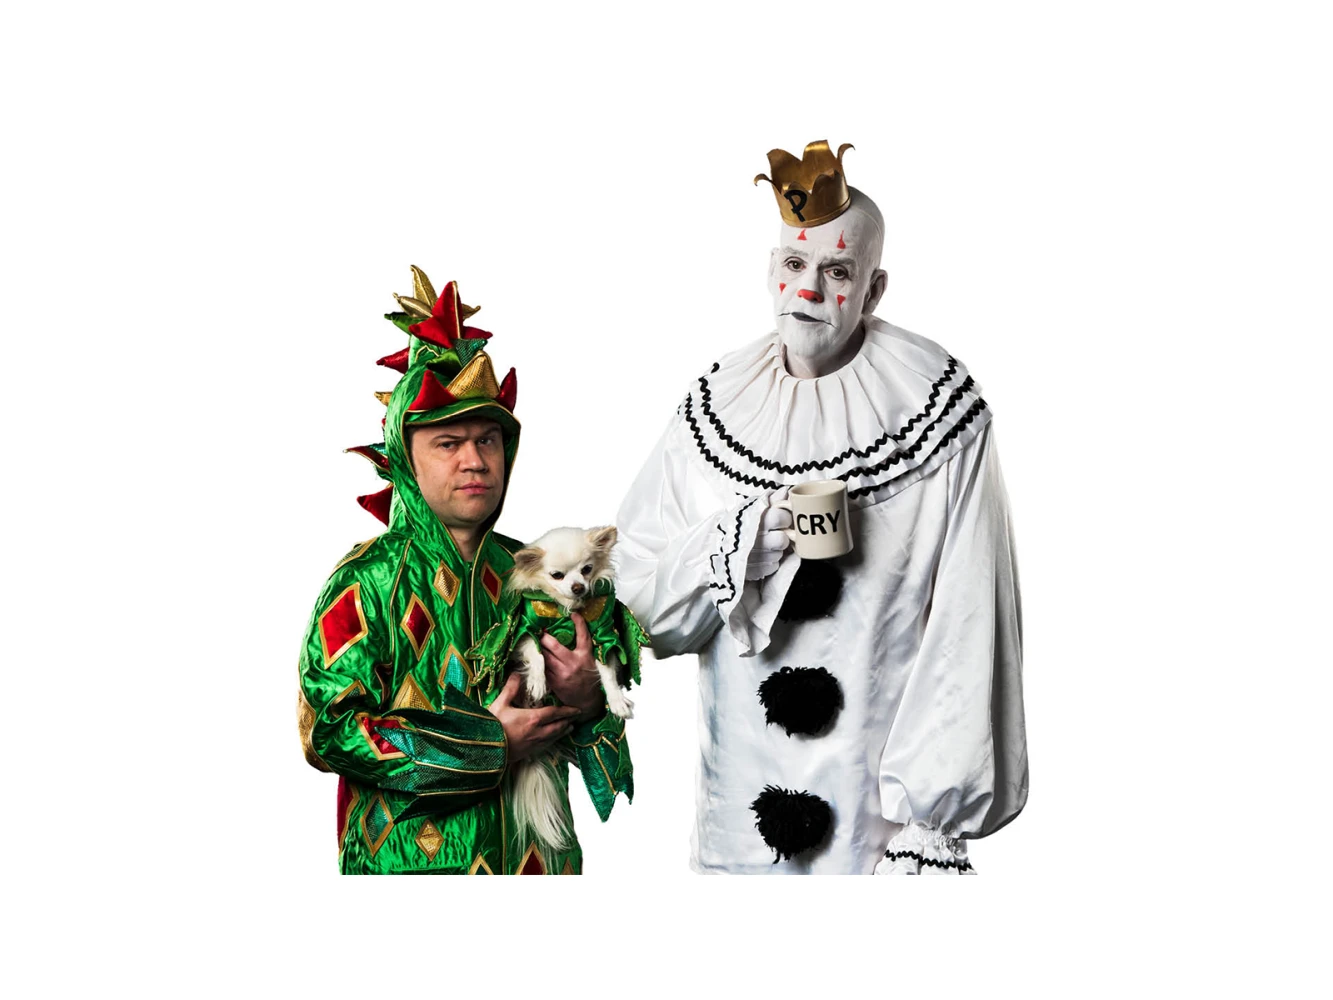 Piff the Magic Dragon and Puddles Pity Party: The Misery Loves Company Tour: What to expect - 3